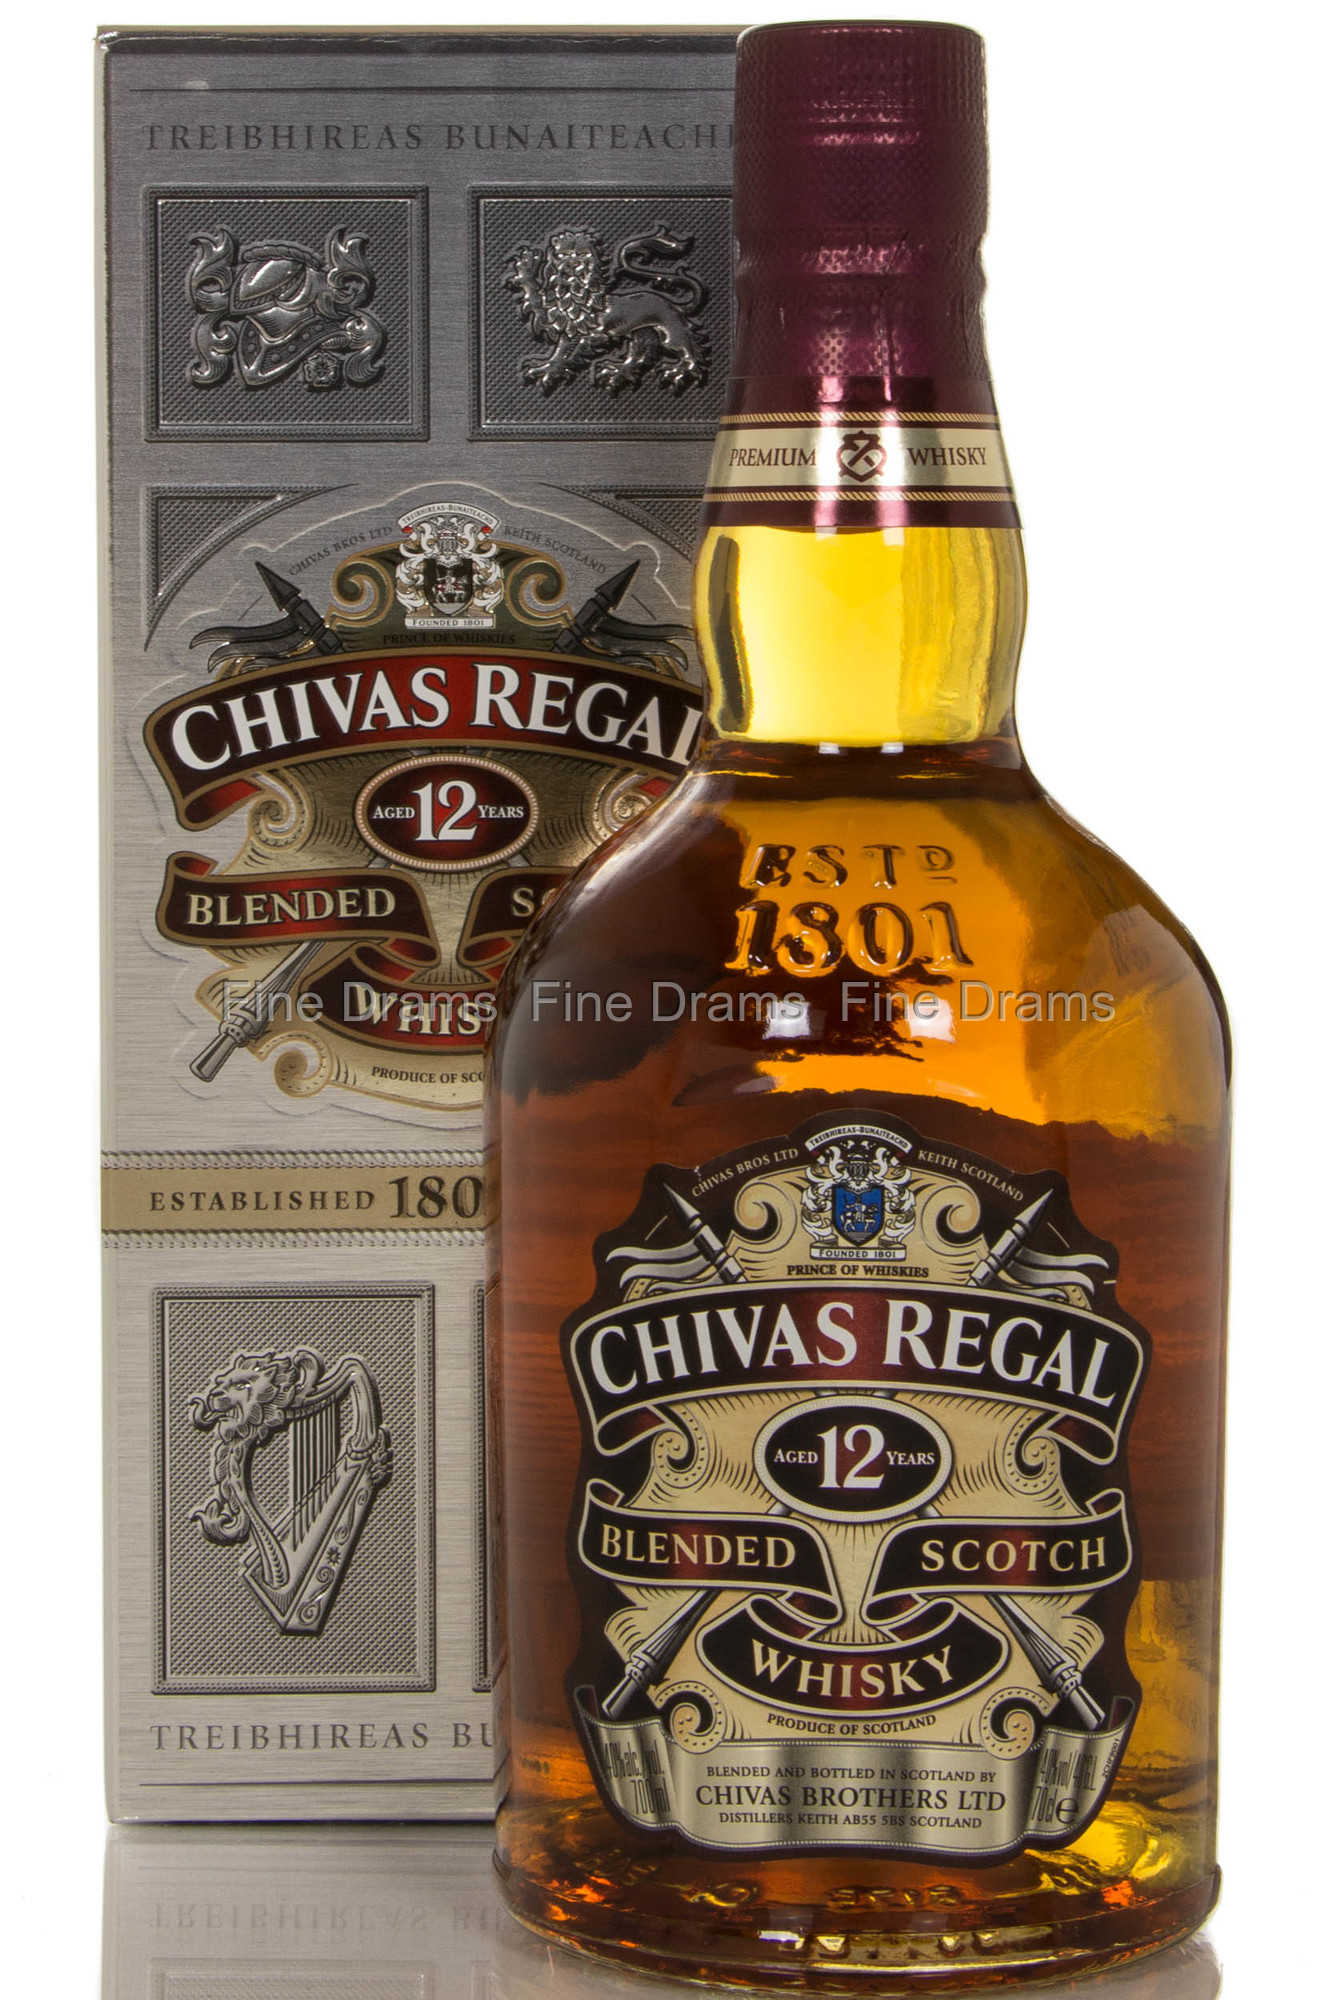 https://images.finedrams.com/image/18890-large-1/chivas-regal-12-year-old-whisky.jpg